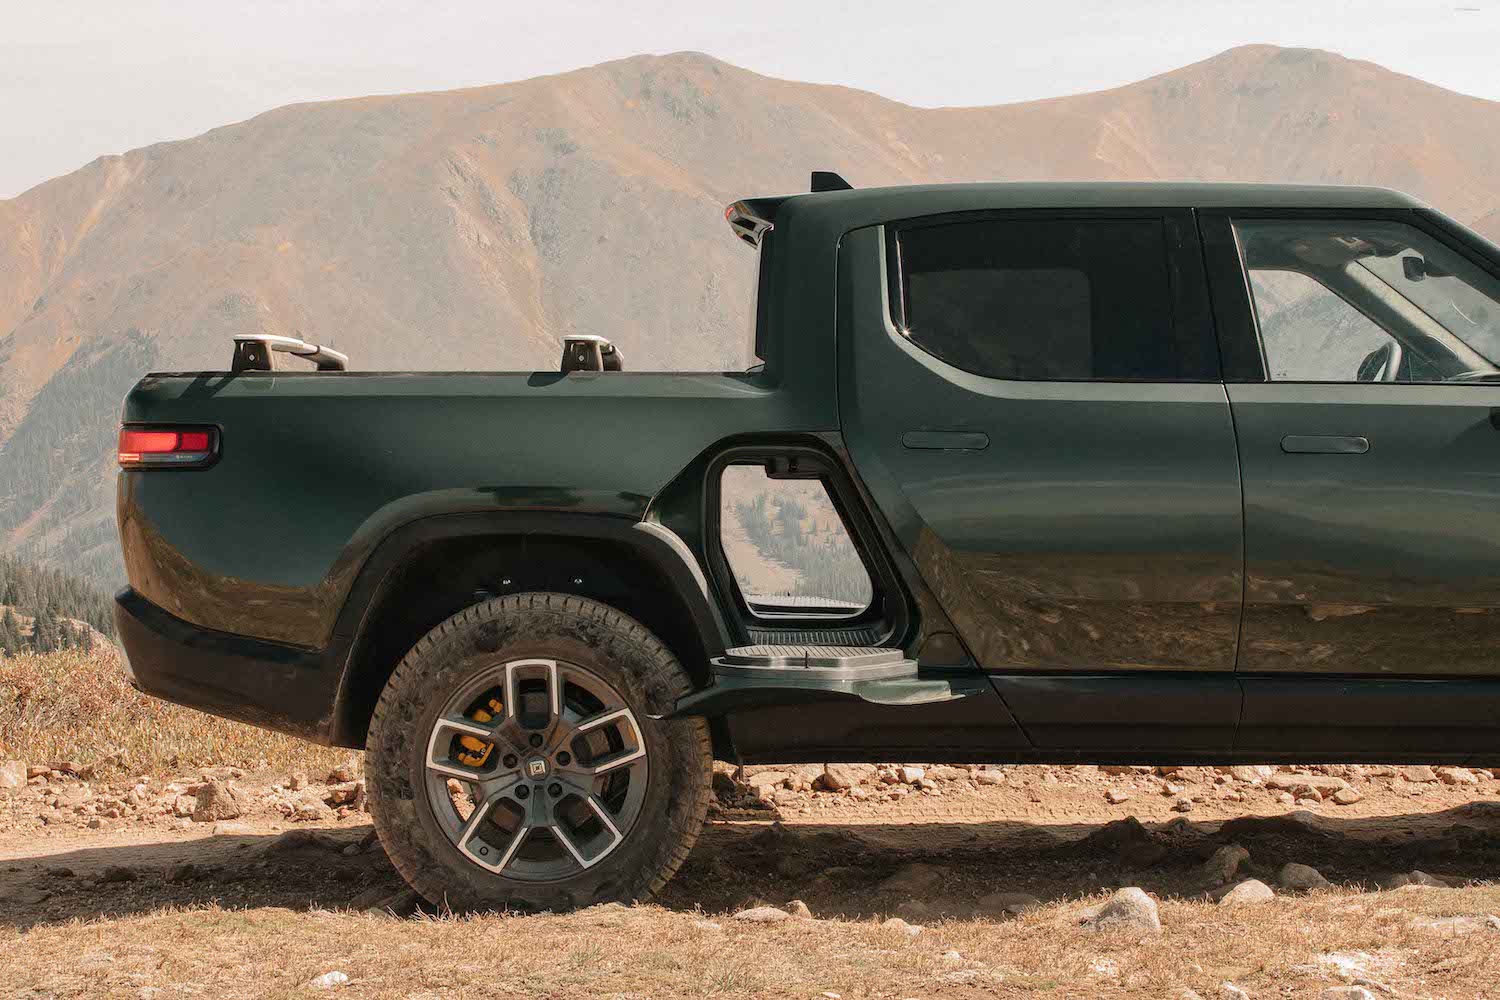 A Rivian electric truck parked in the desert with both its gear tunnel doors open so you can see all the way through the pickup, mountains visible in the background.